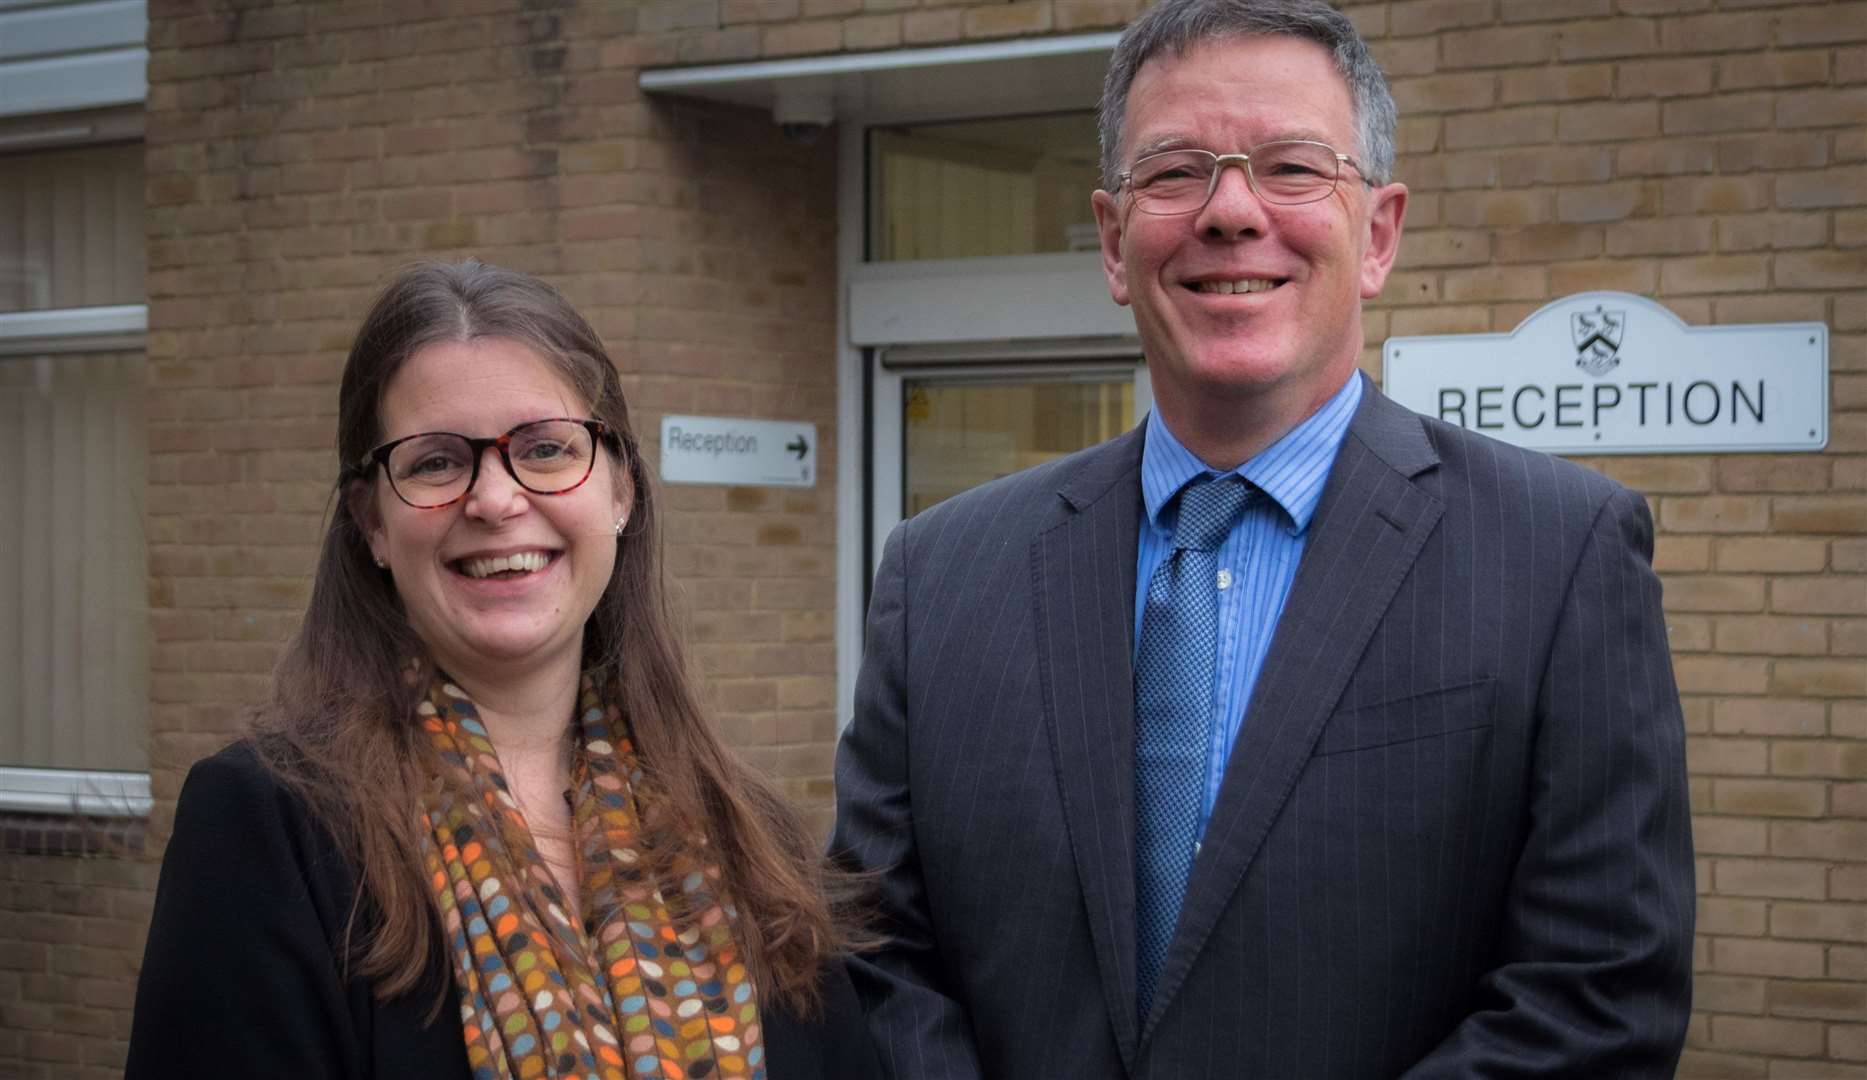 Alan Brookes, pictured with Fulston Manor's new head of school Susie Burden, announced his retirement